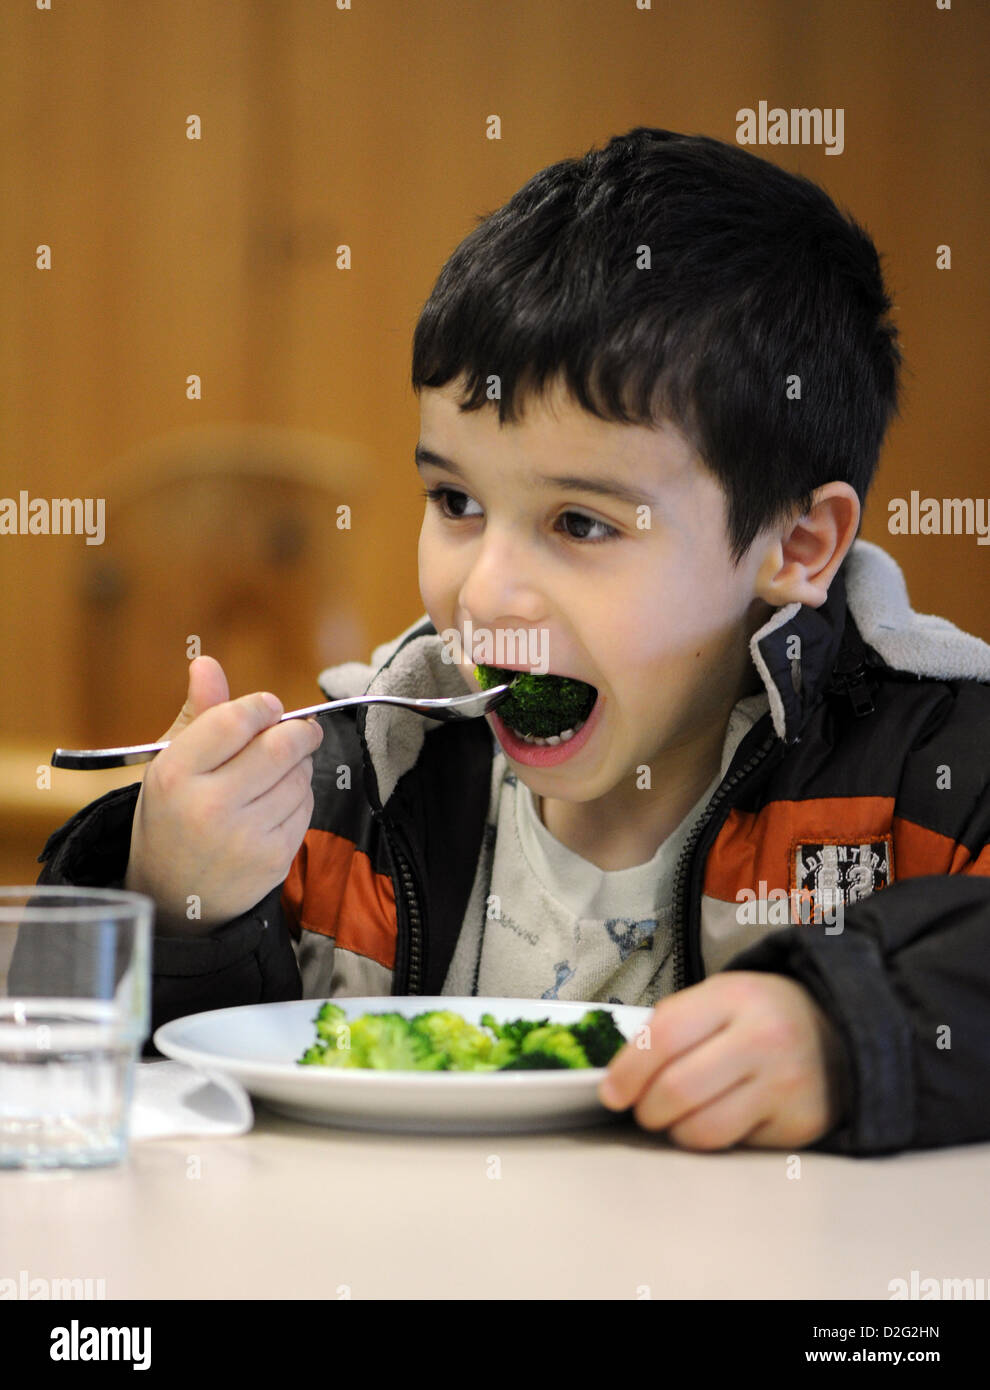 Kuersat Iltas eats broccoli at the Hospital for Paediatrics and Adolescent Medicine in Dortmund, Germany, 23 January 2013. The Research Institute for Child Nutrition presented a new children's menu for hospitals. Photo: Caroline Seidel Stock Photo